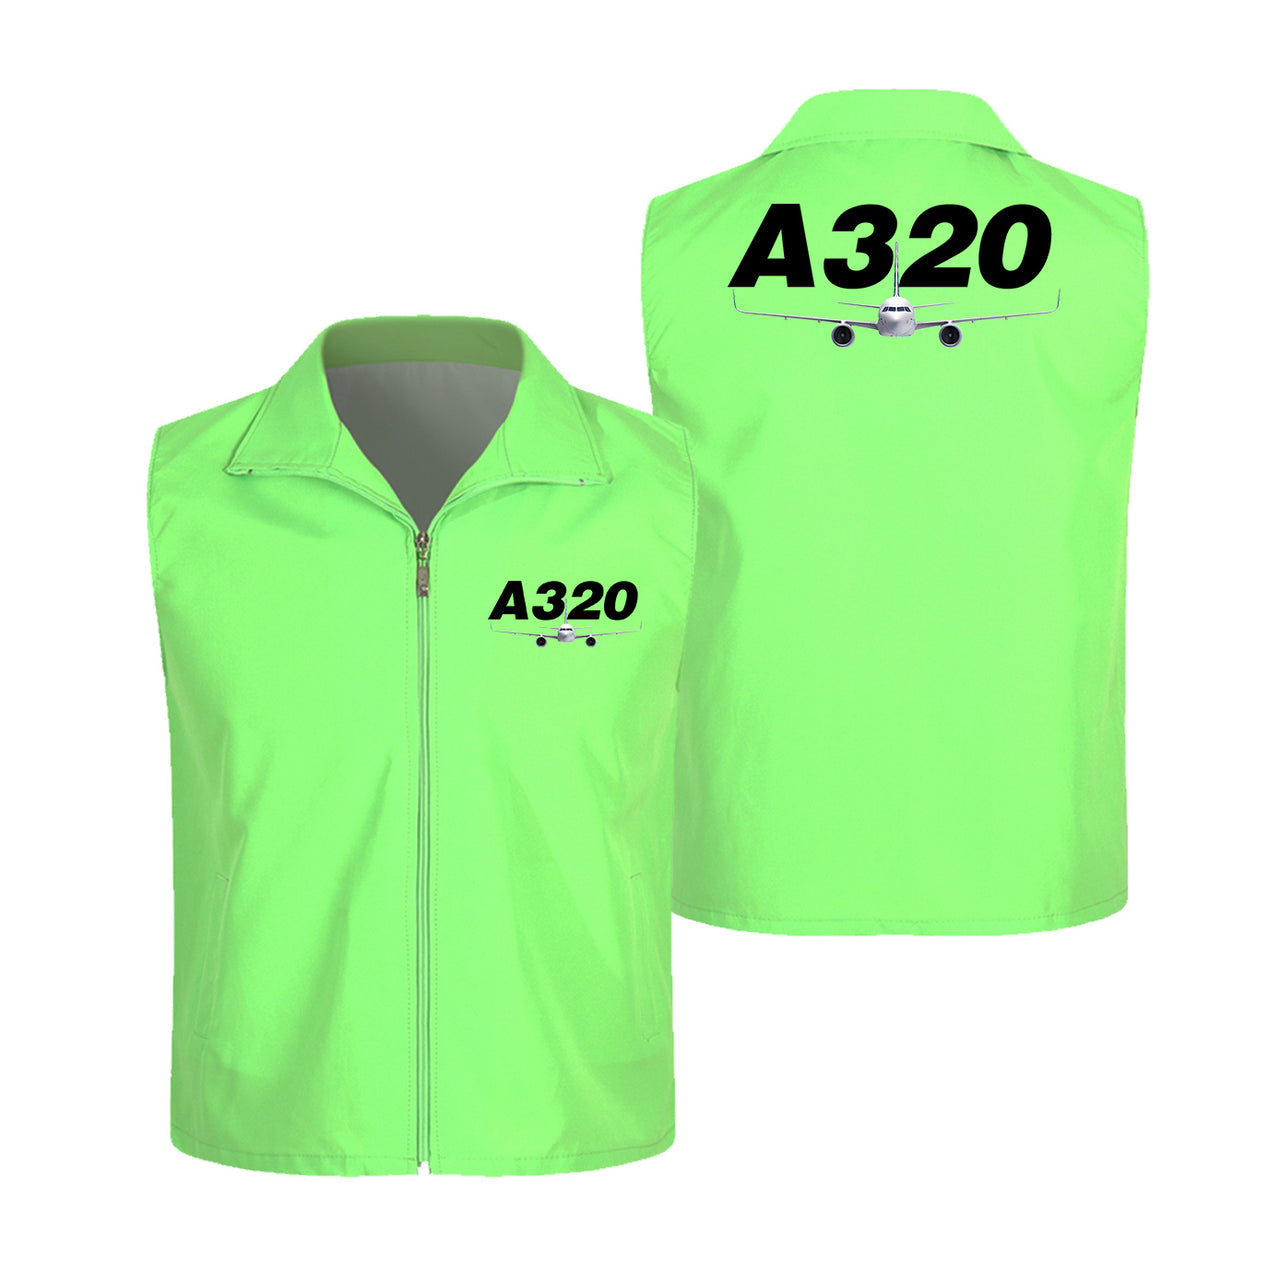 Super Airbus A320 Designed Thin Style Vests